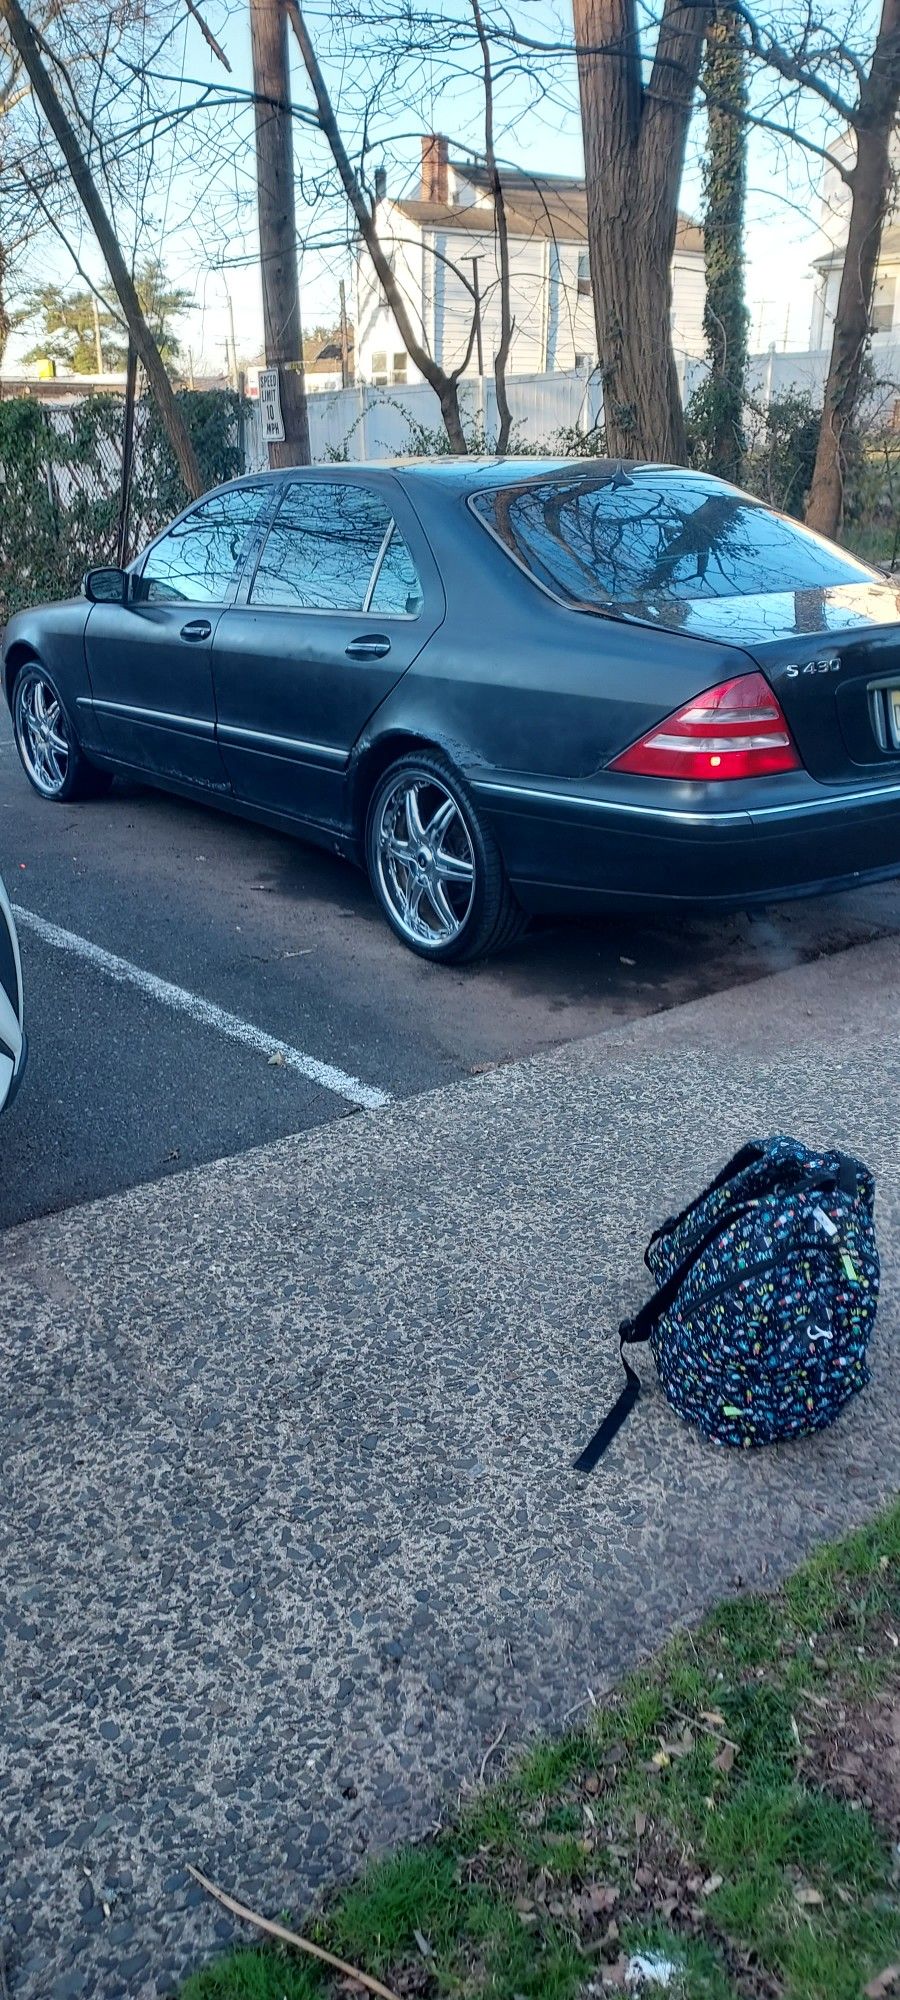 2001 MERCEDES BENZ S430. Selling for Parts. 